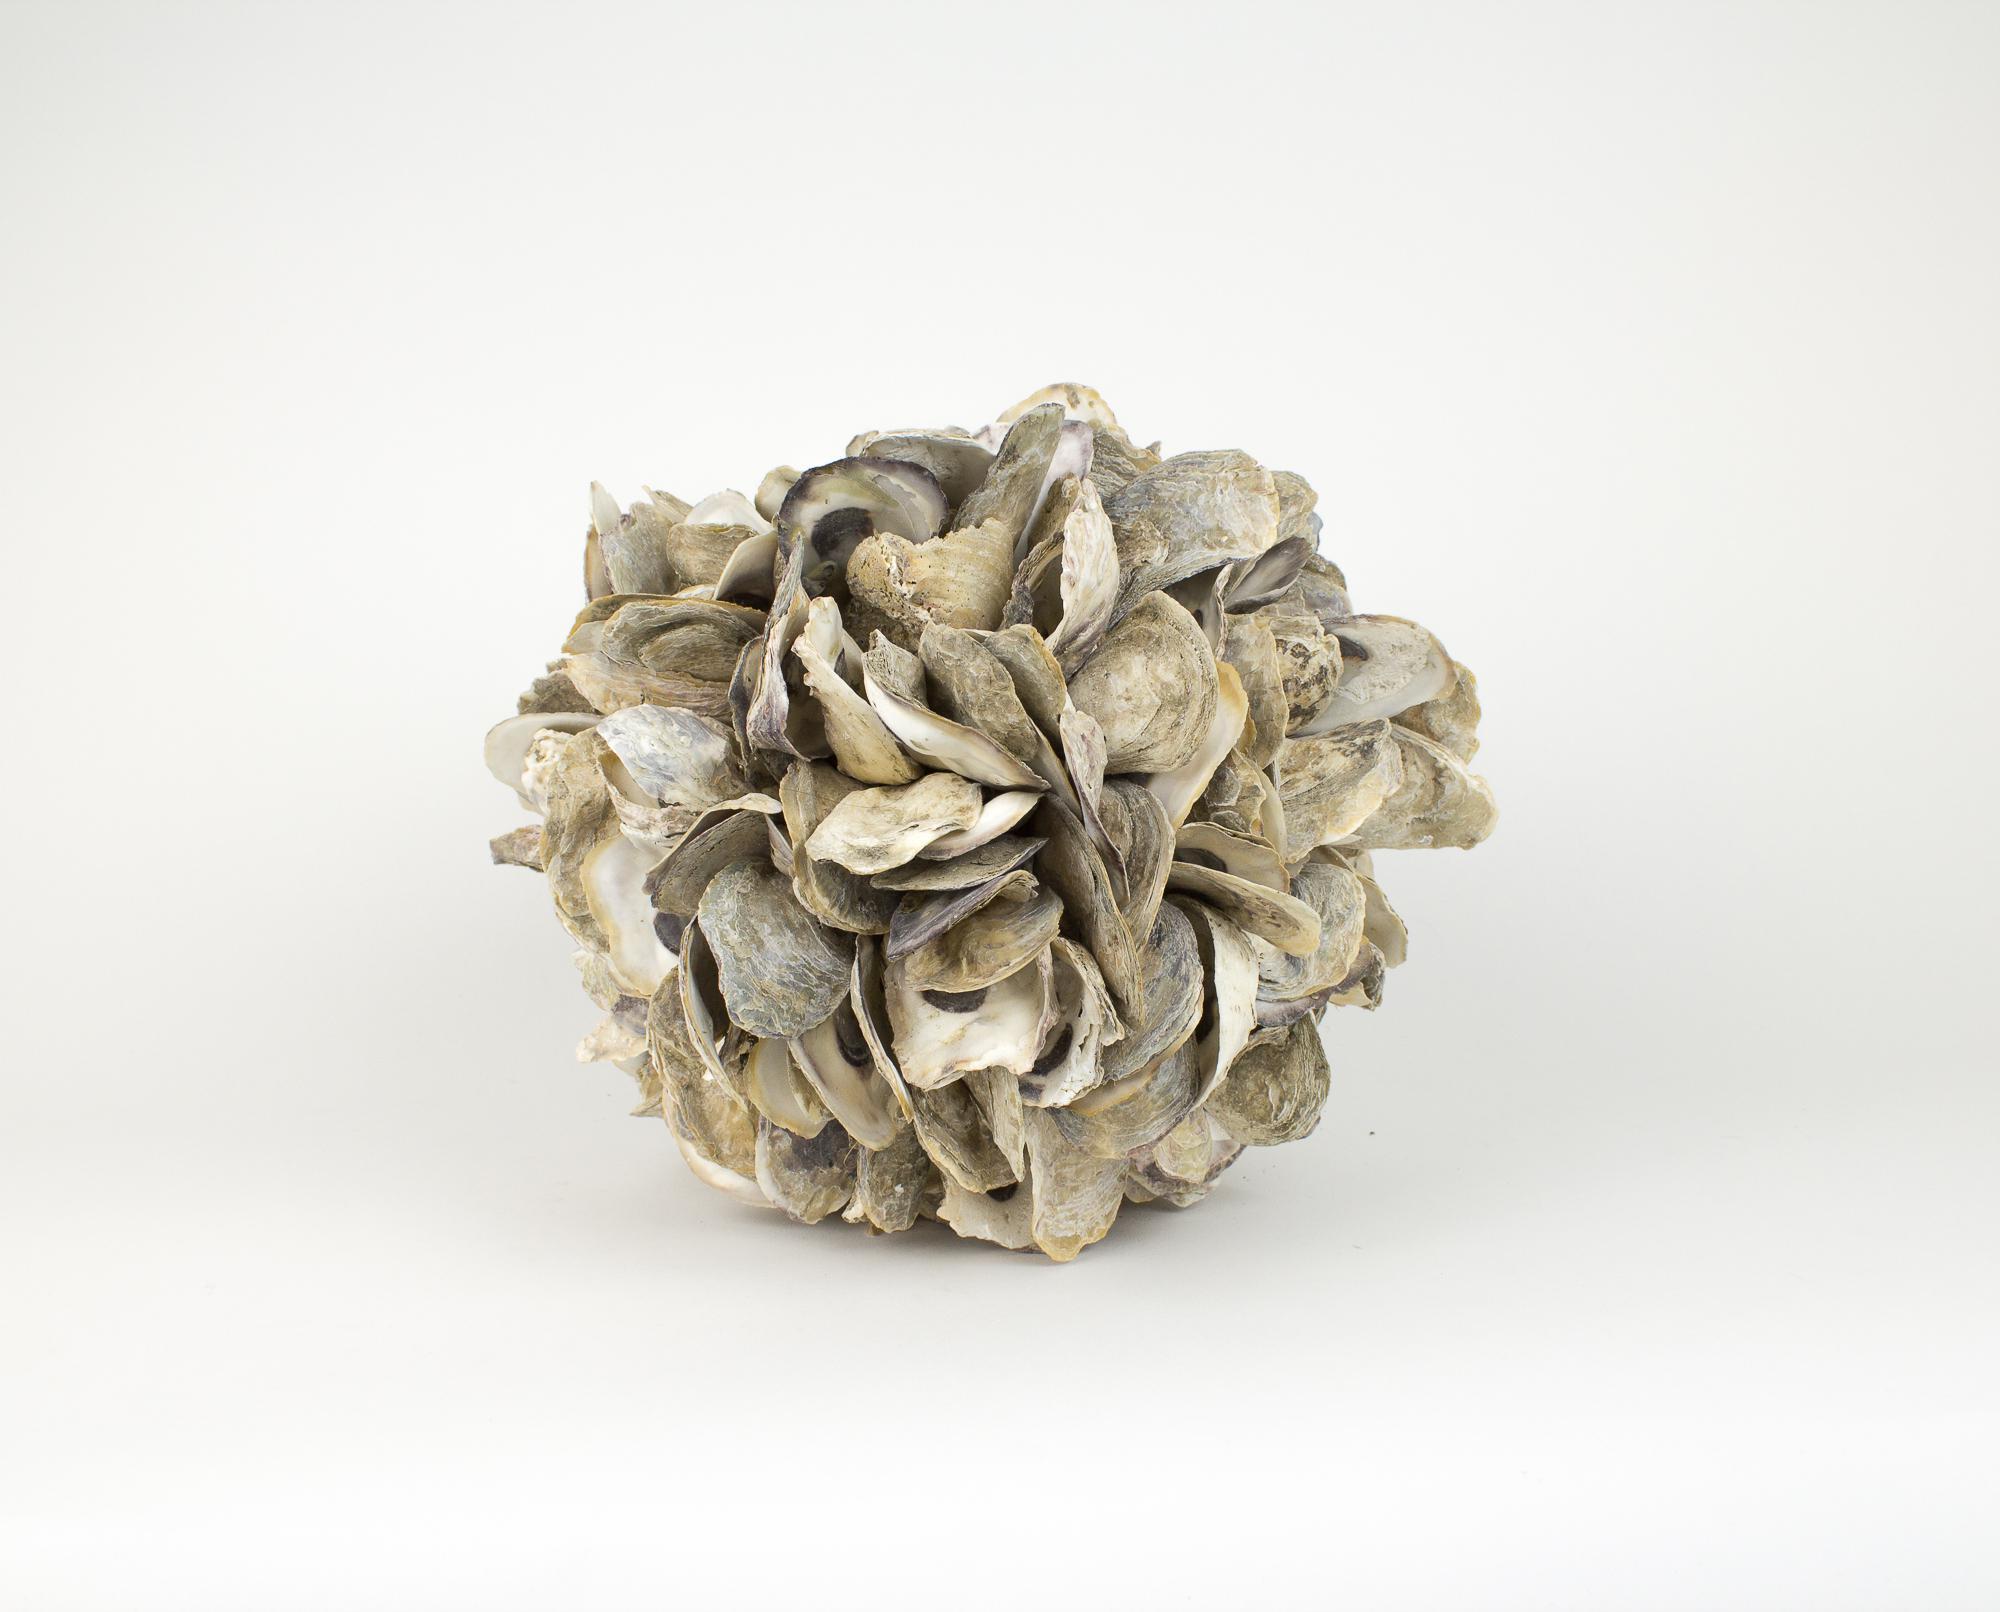 20th Century Large Natural Oyster Shell Sphere Sculpture